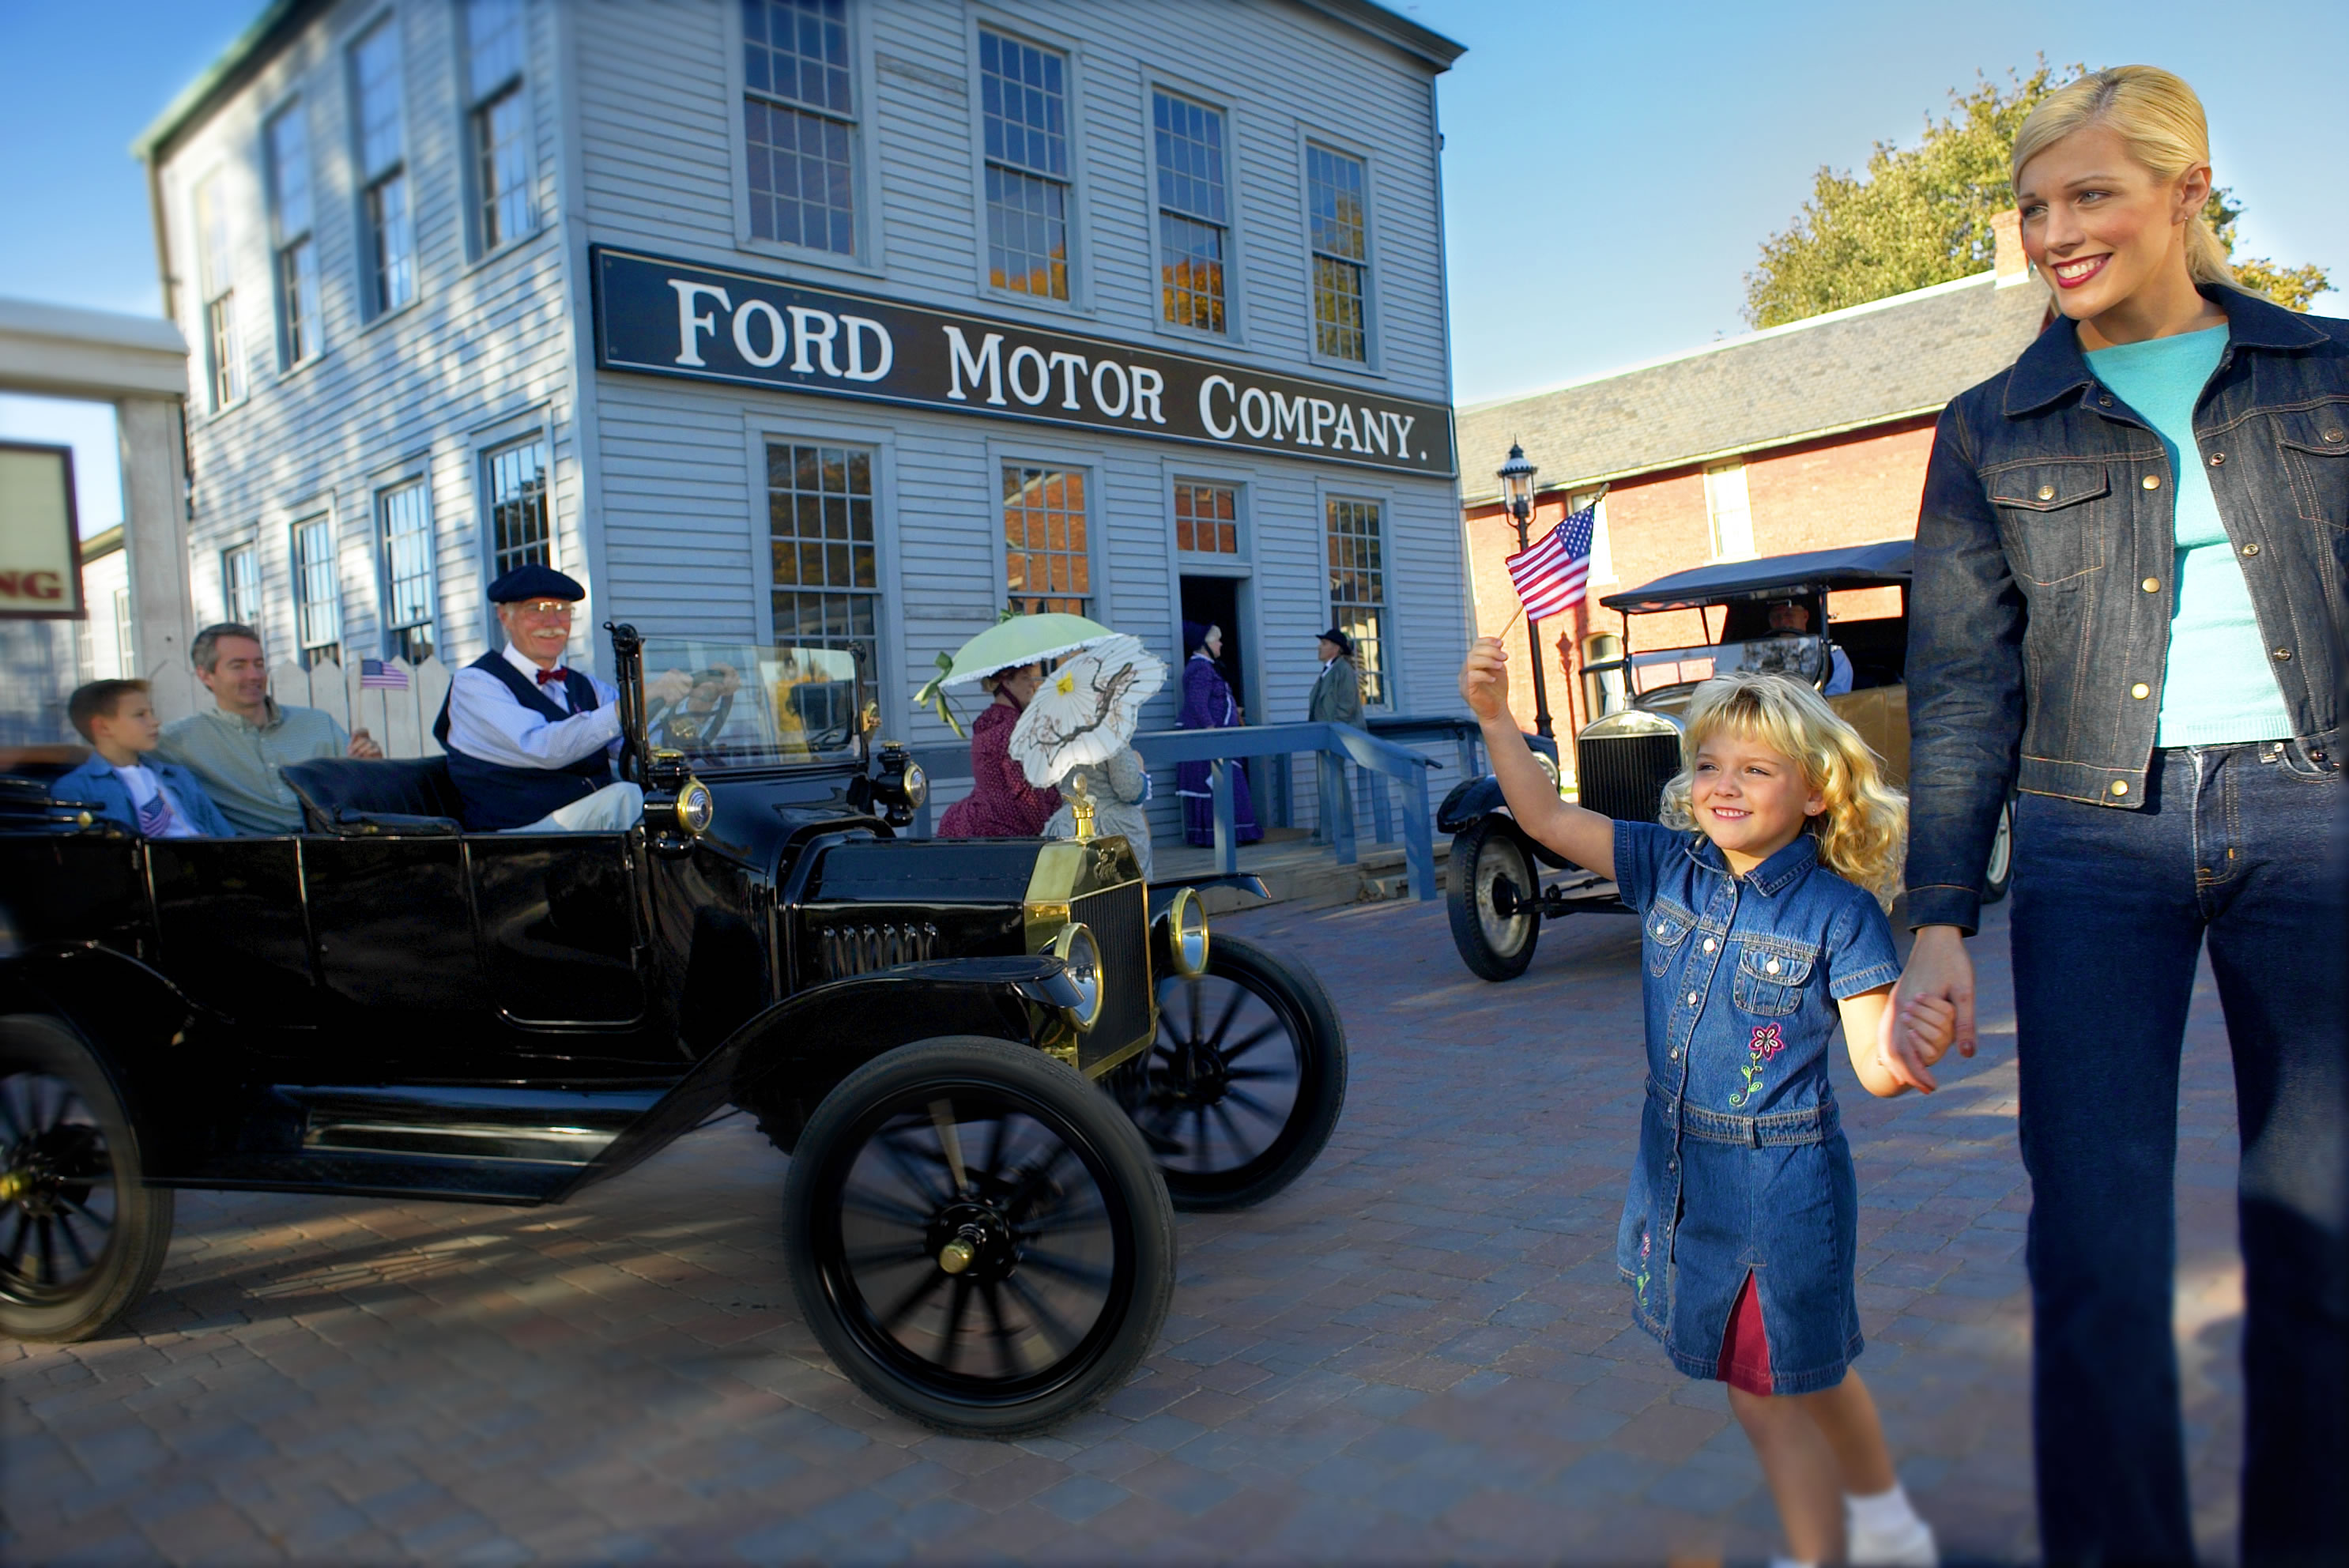 The Henry Ford and Greenfield Village